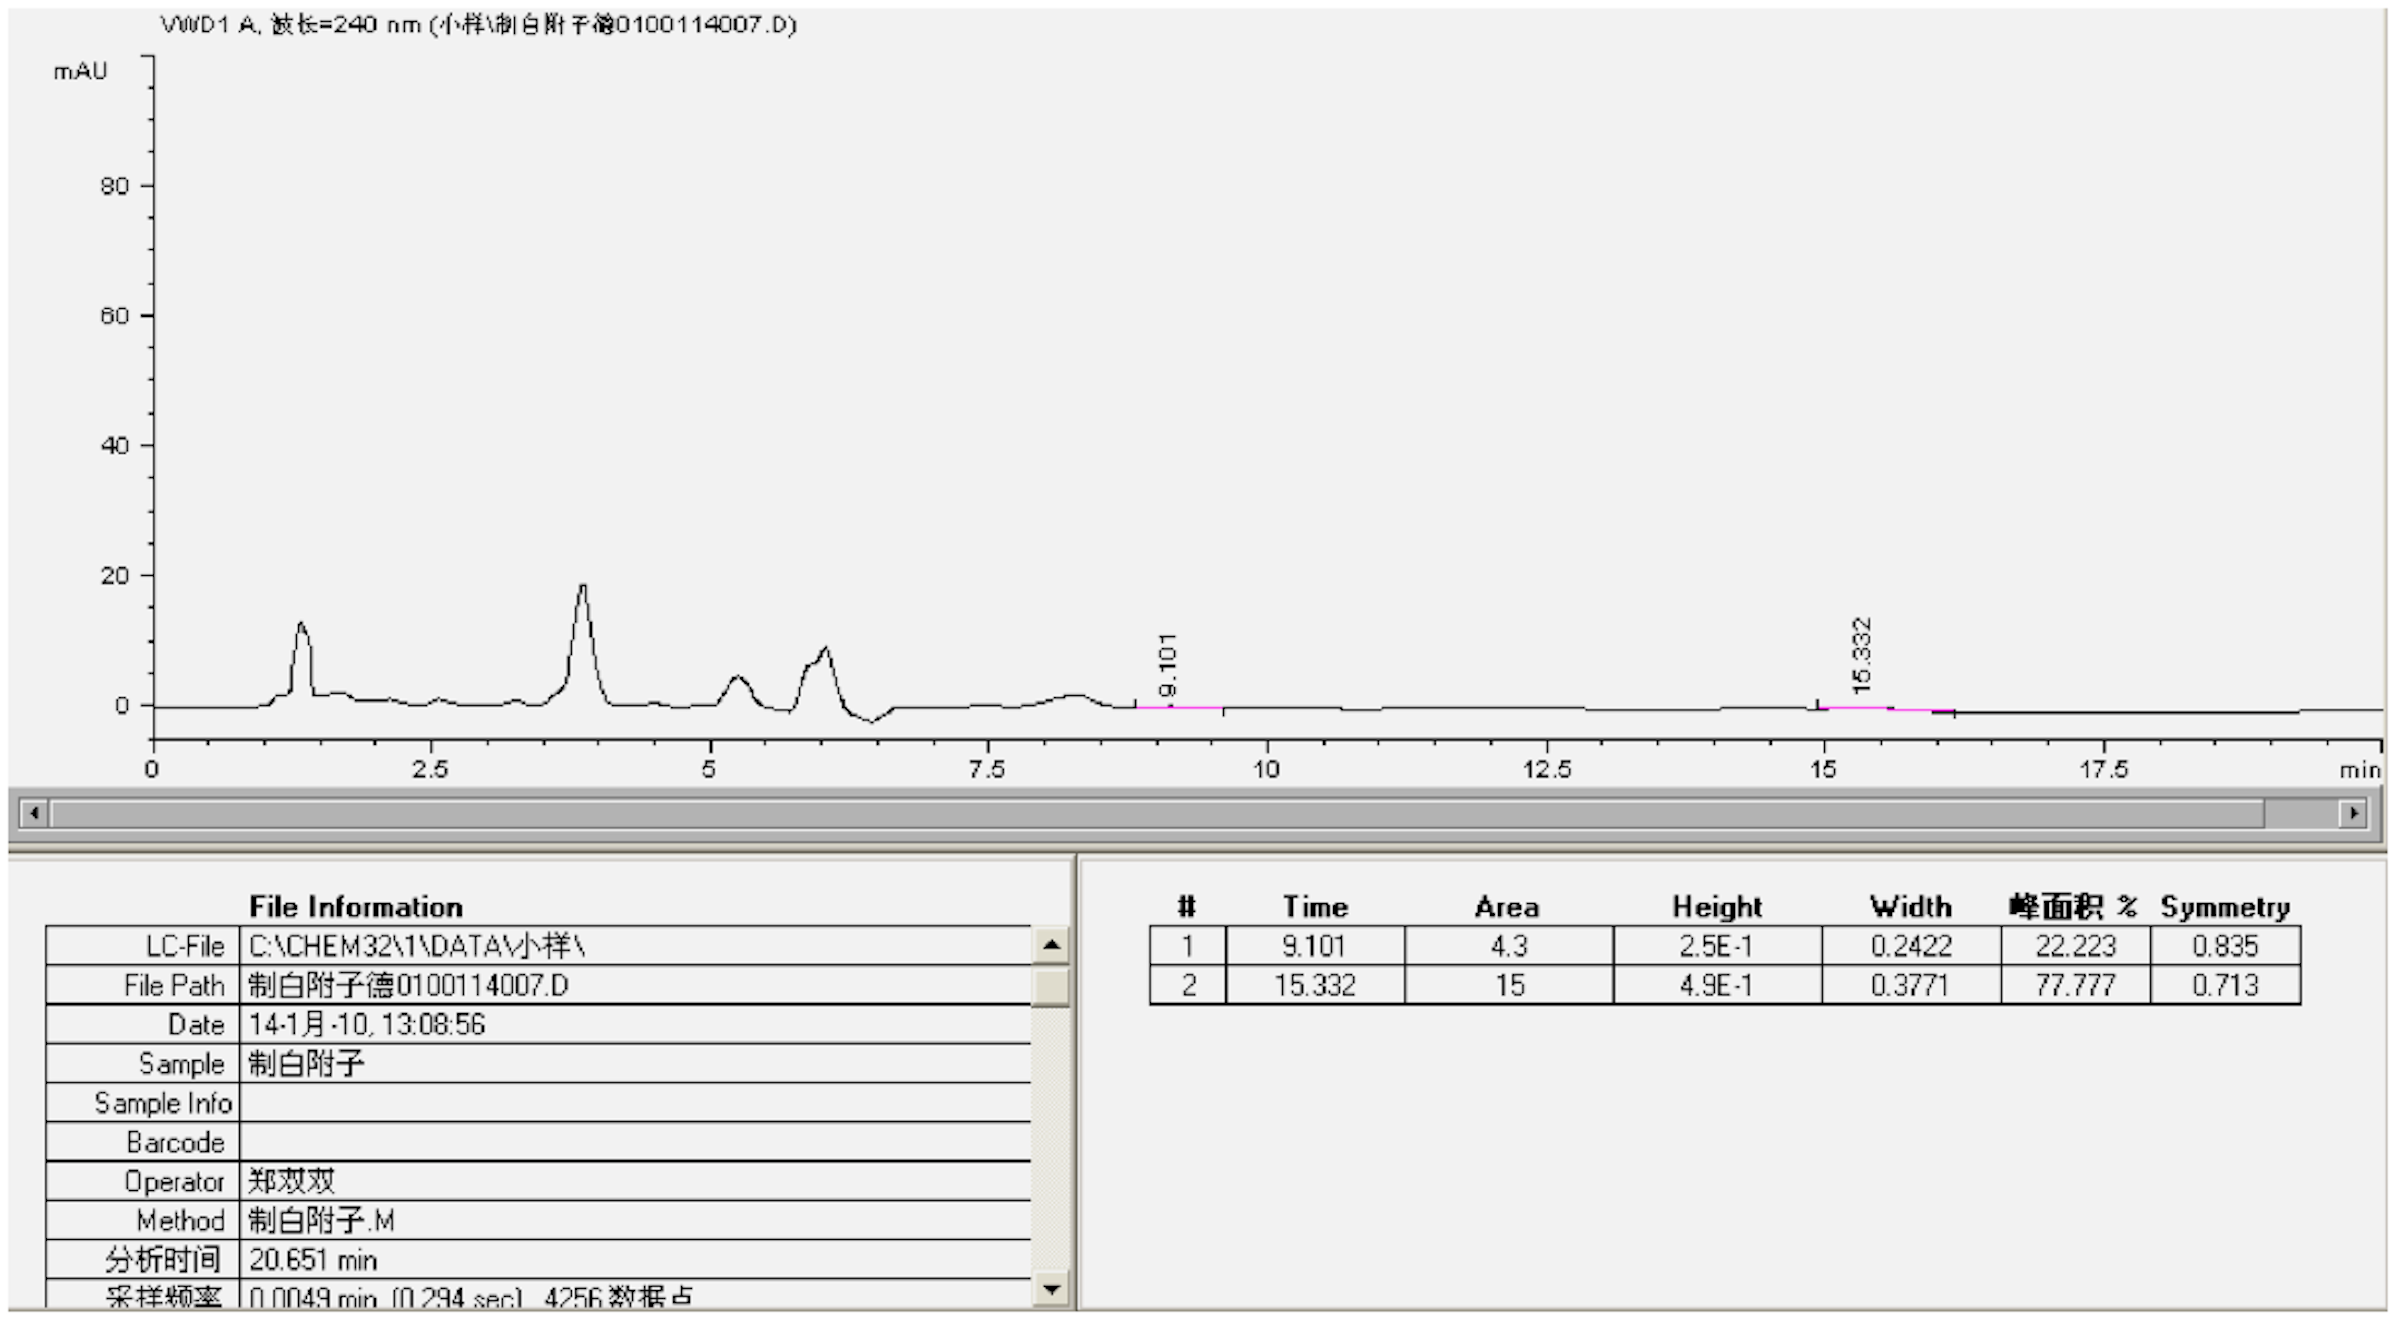  Fig. 3: HPLCS chromatogram of traditionally grown and processed Radix Aconiti Lateralis Praeparata[19] used by Classical Pearls